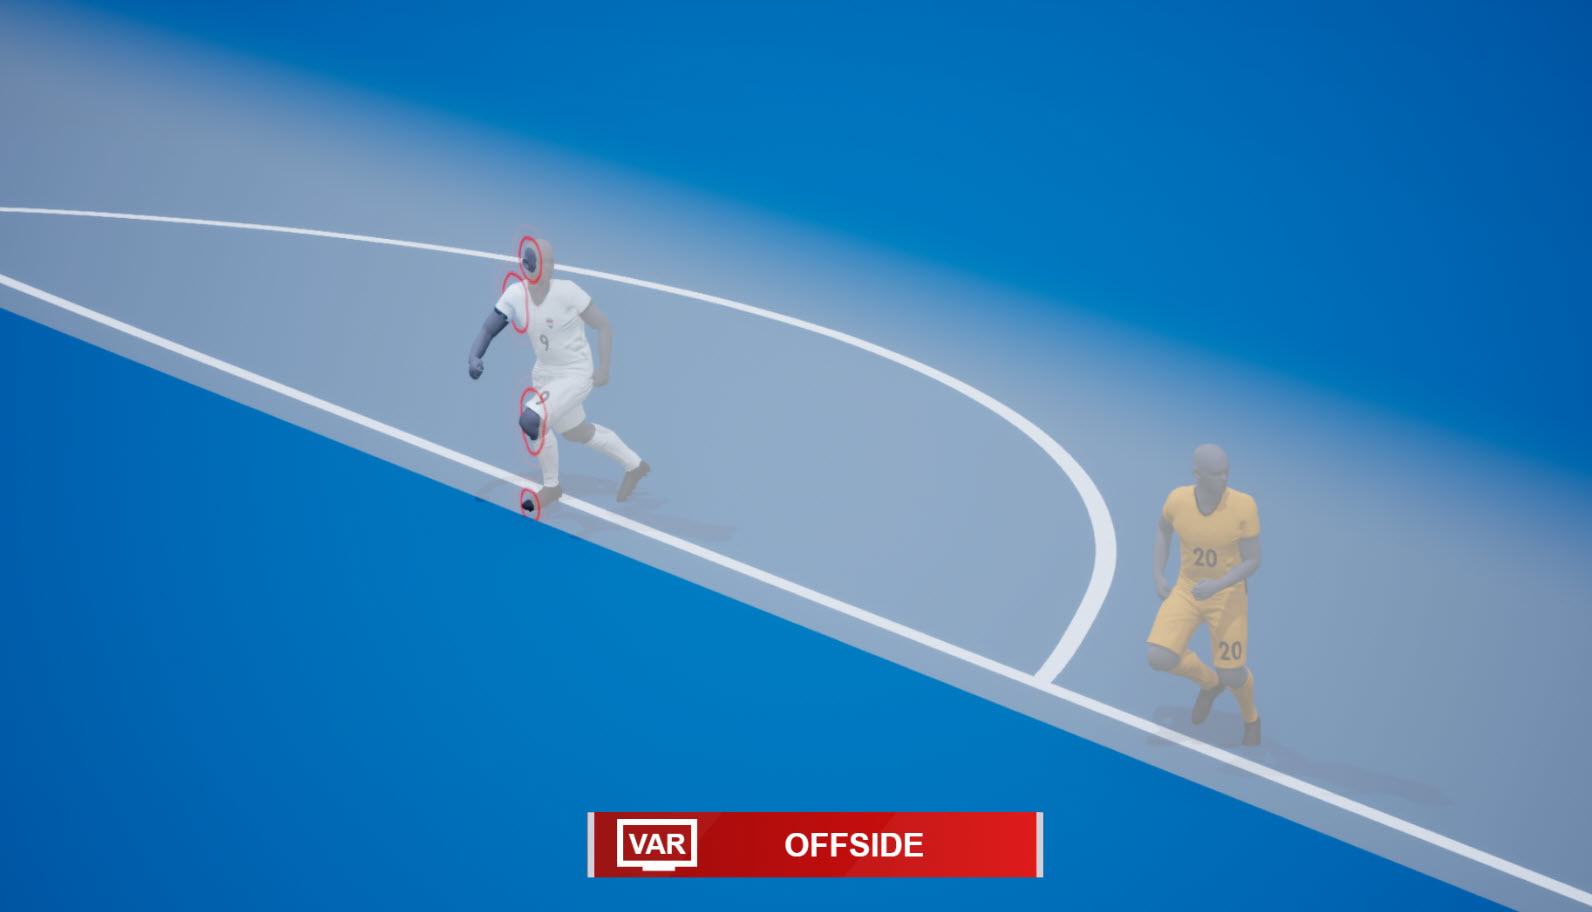 Explained: FIFA’s New Semi-automated Offside Technology